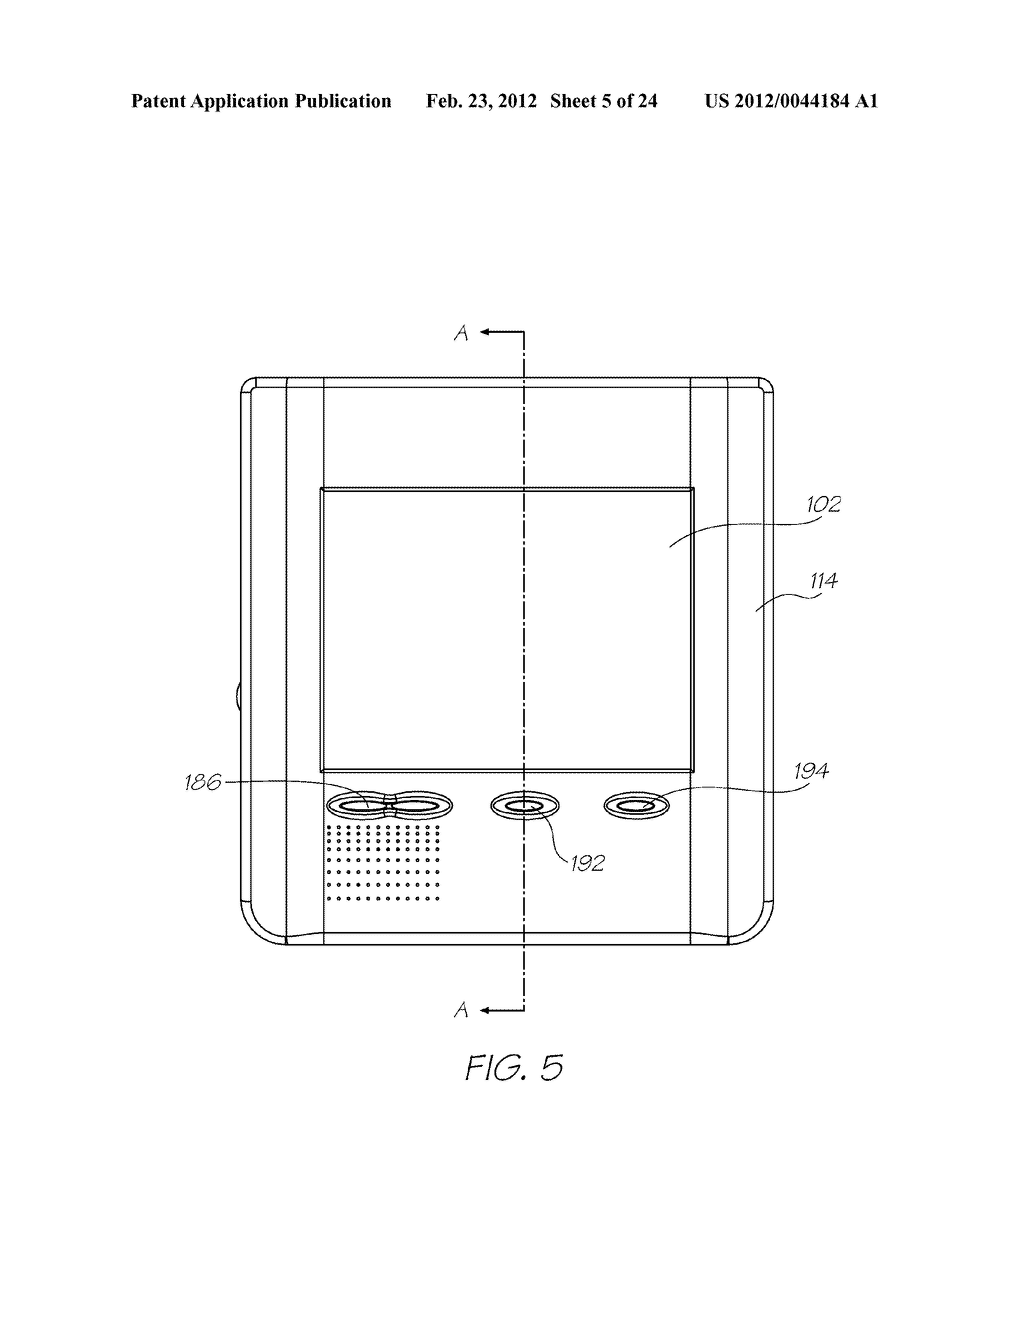 HANDHELD DISPLAY DEVICE HAVING PROCESSOR FOR RENDERING DISPLAY OUTPUT TO     PROVIDE REAL-TIME VIRTUAL TRANSPARENCY - diagram, schematic, and image 06